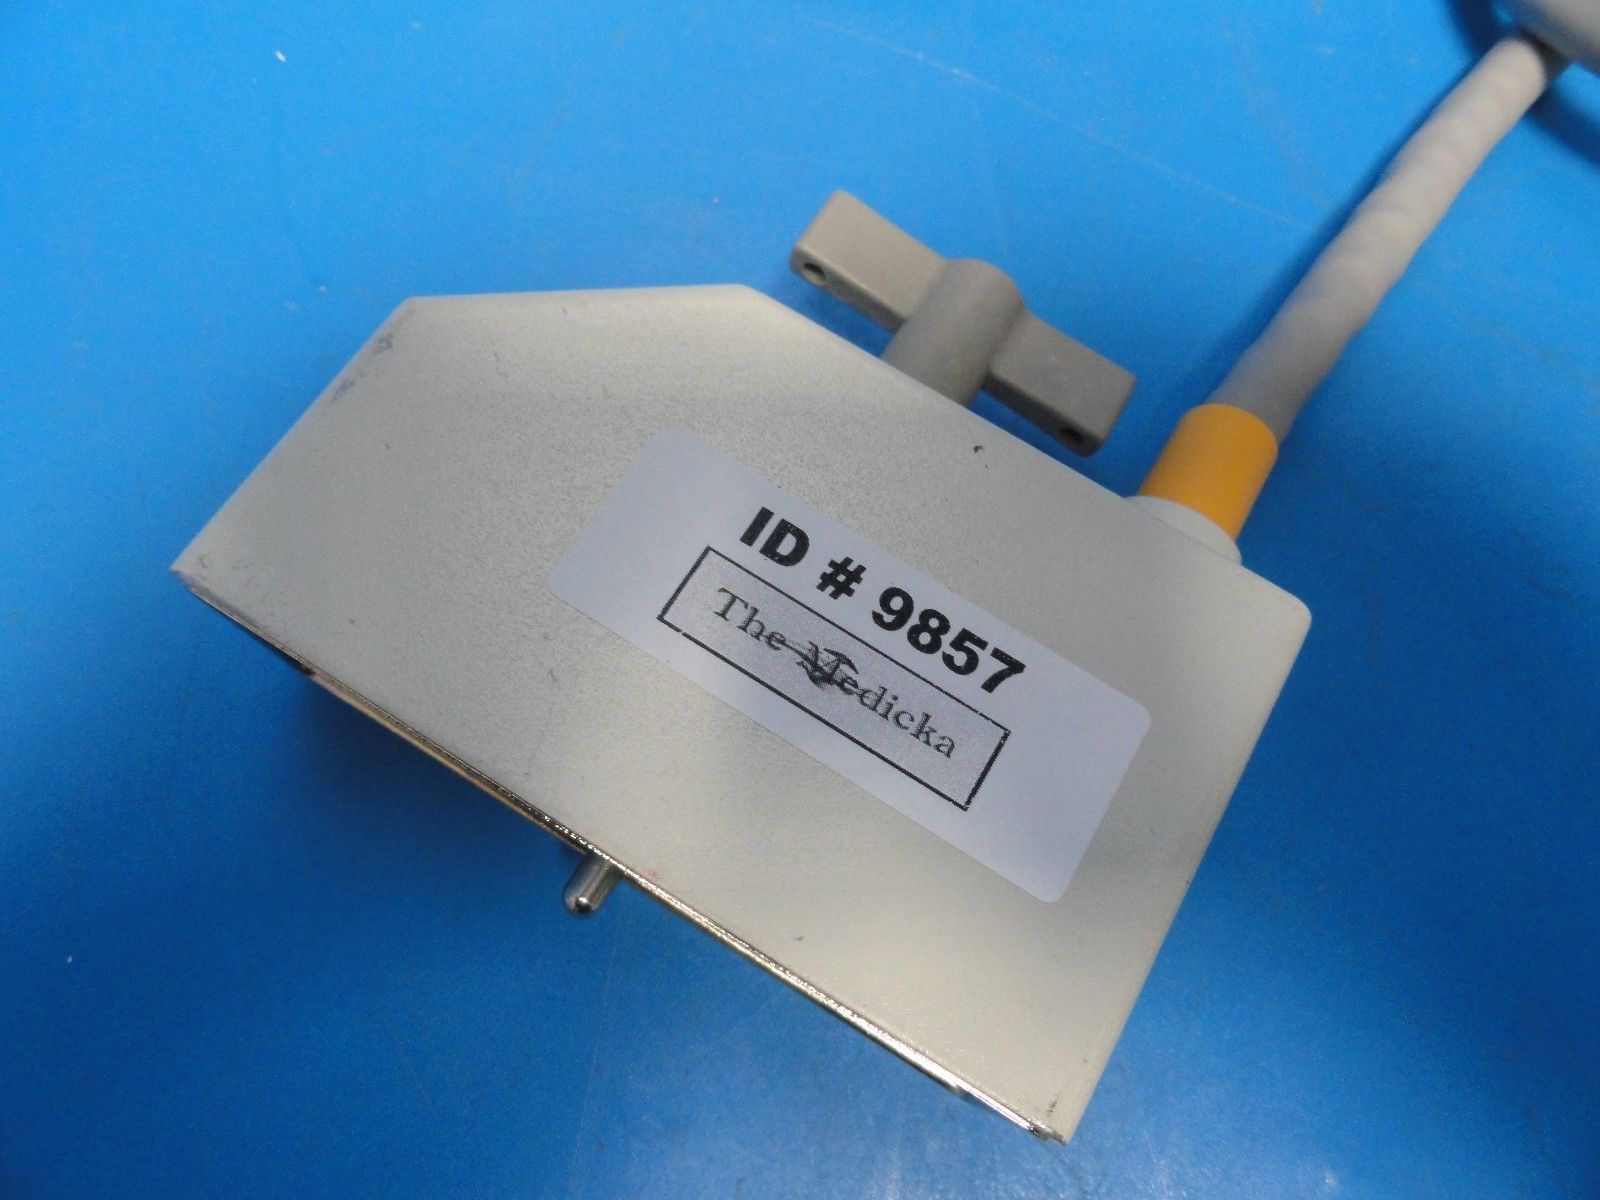 Toshiba PLF-703ST Linear Array Ultrasound Transducer for Sonolayer SSA-270A/9857 DIAGNOSTIC ULTRASOUND MACHINES FOR SALE